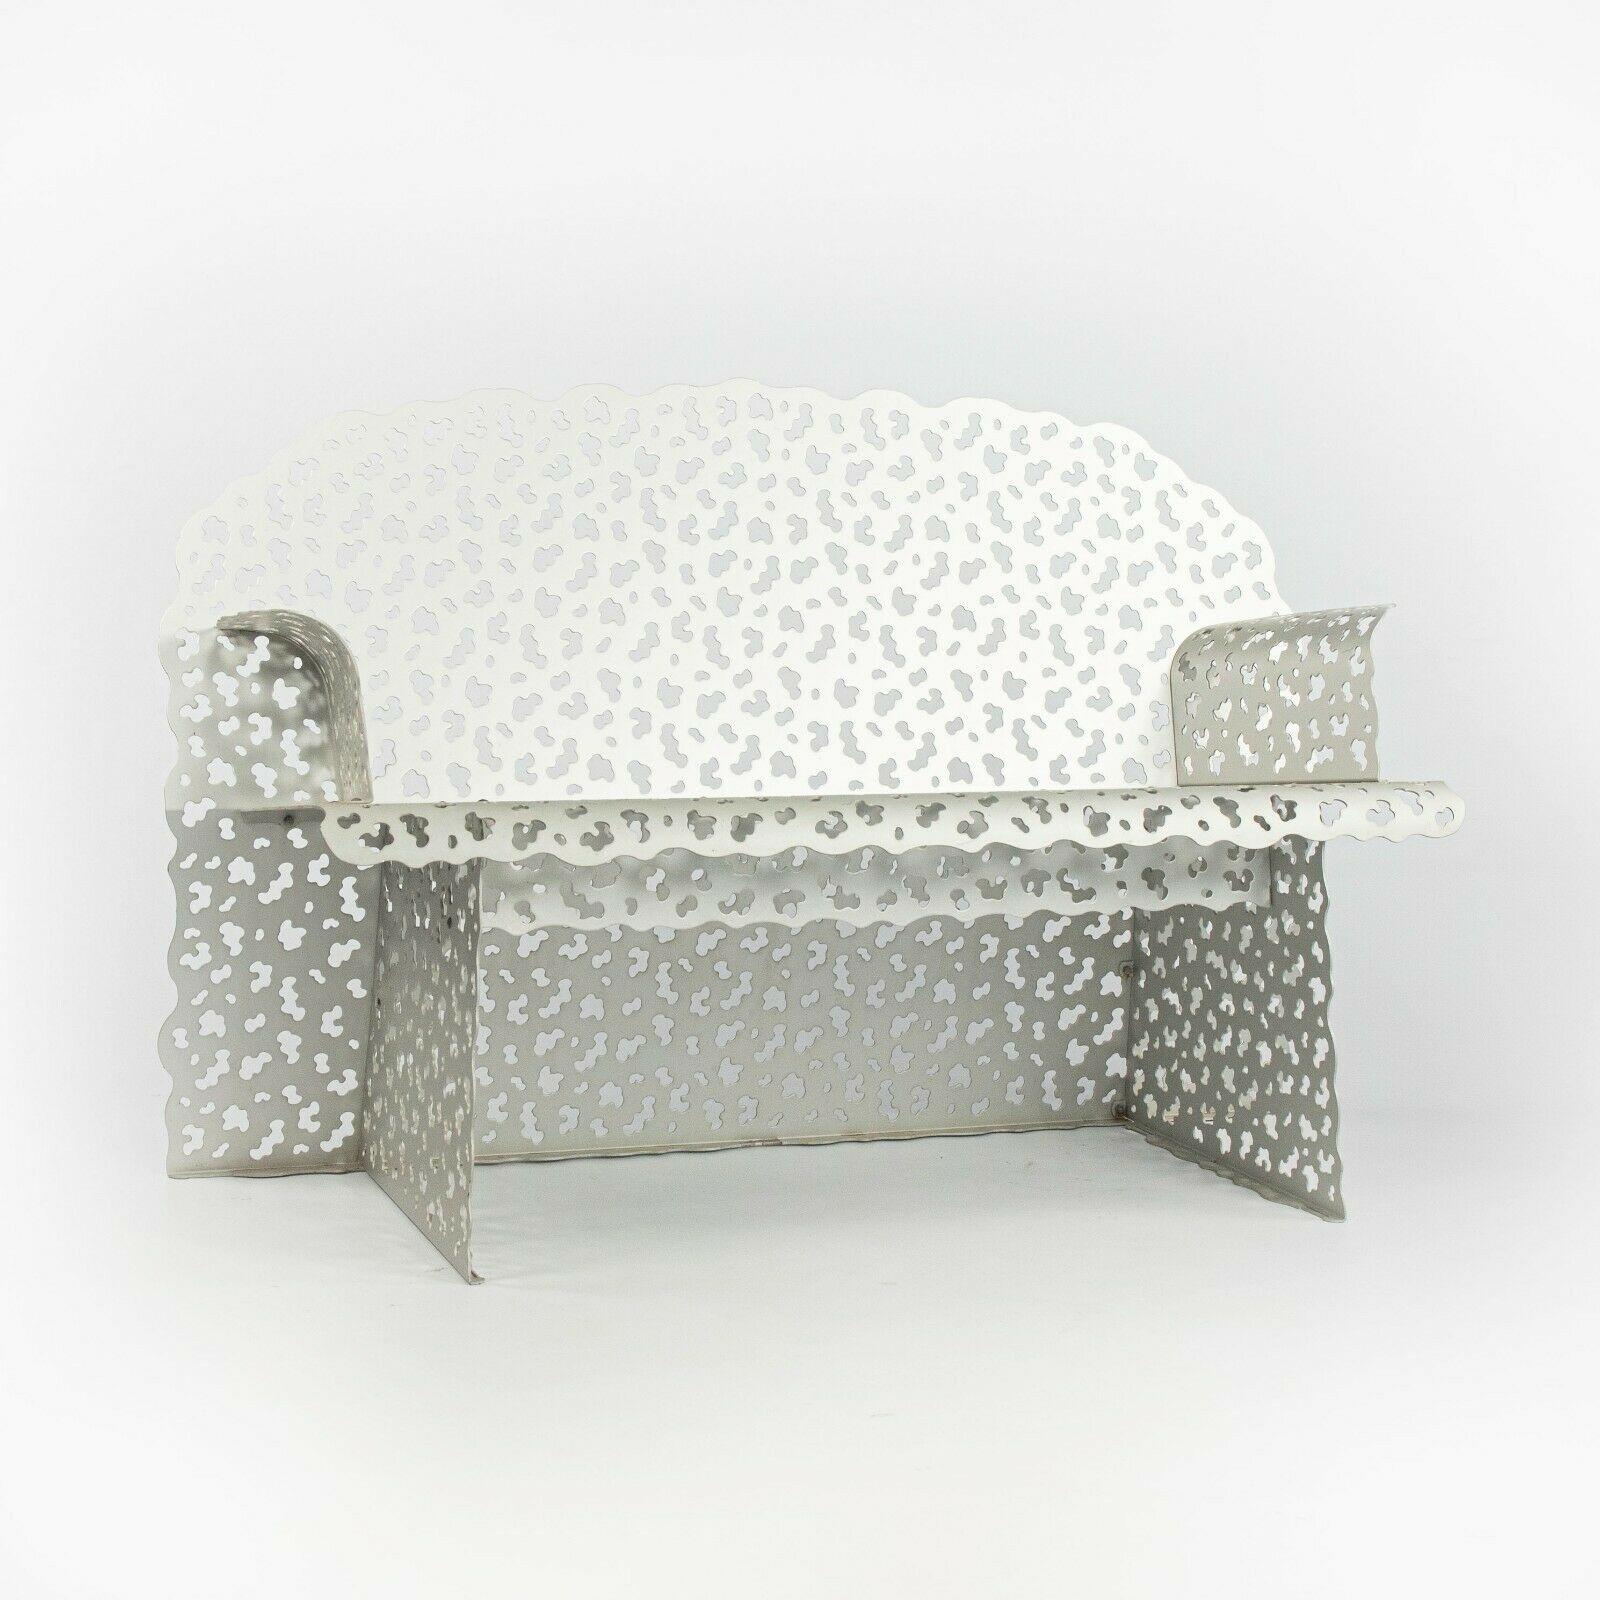 Listed for sale is an exceptionally rare and unusual outdoor Richard Schultz topiary bench. What is particularly unique about this bench is that it has a natural aluminum finish, not a painted finish. This was custom-ordered from Schultz. This